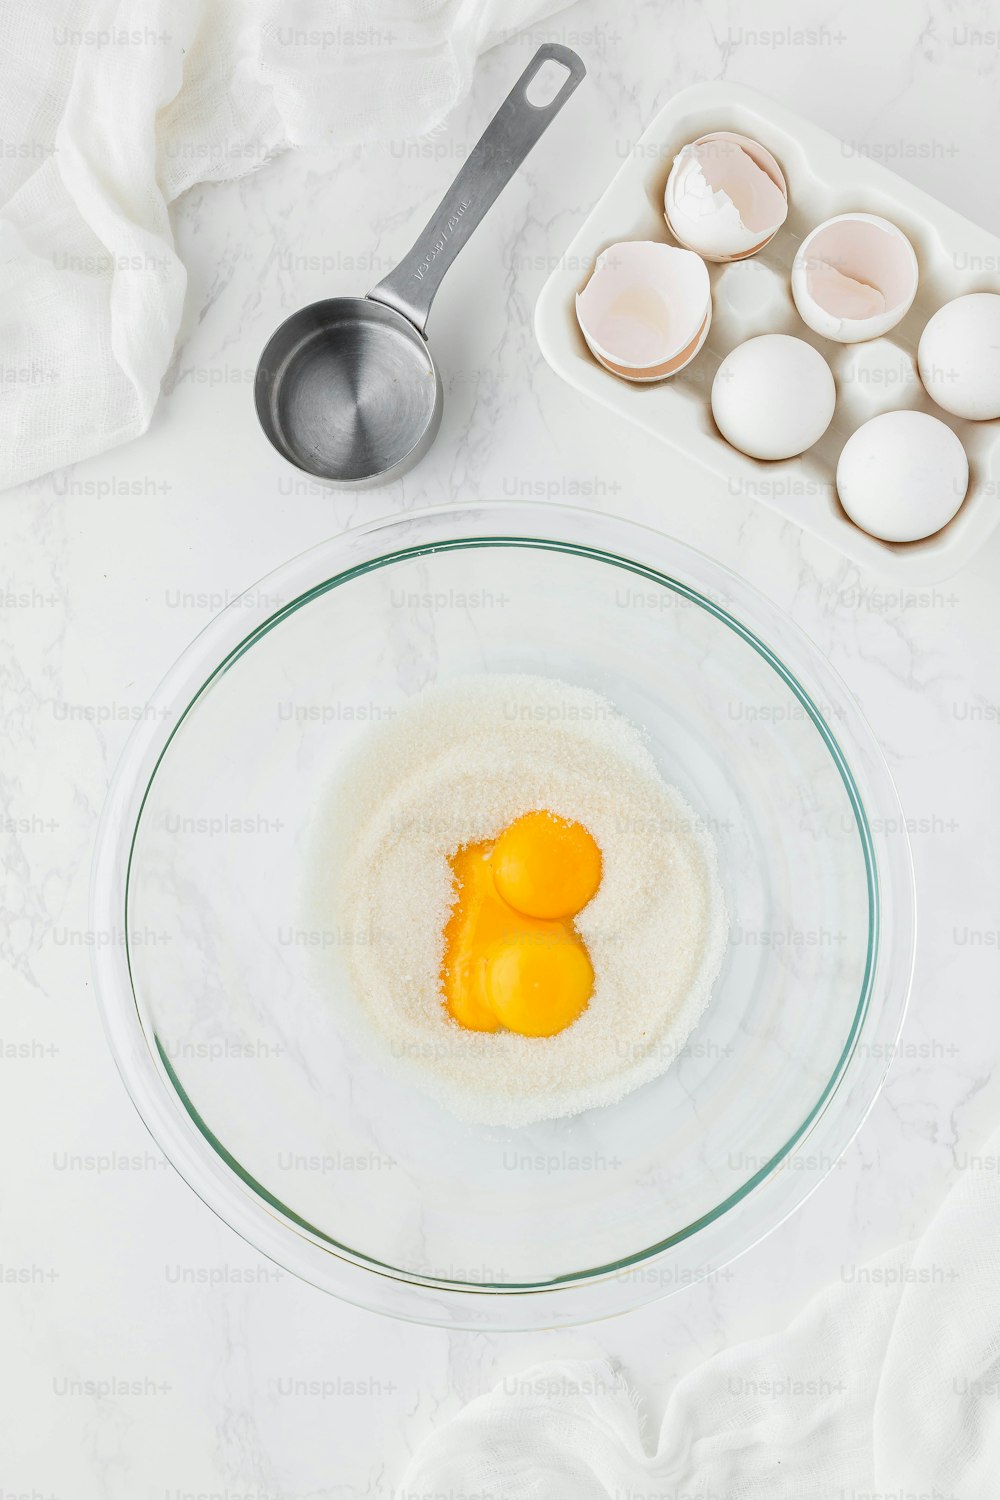 a plate with eggs and a spoon